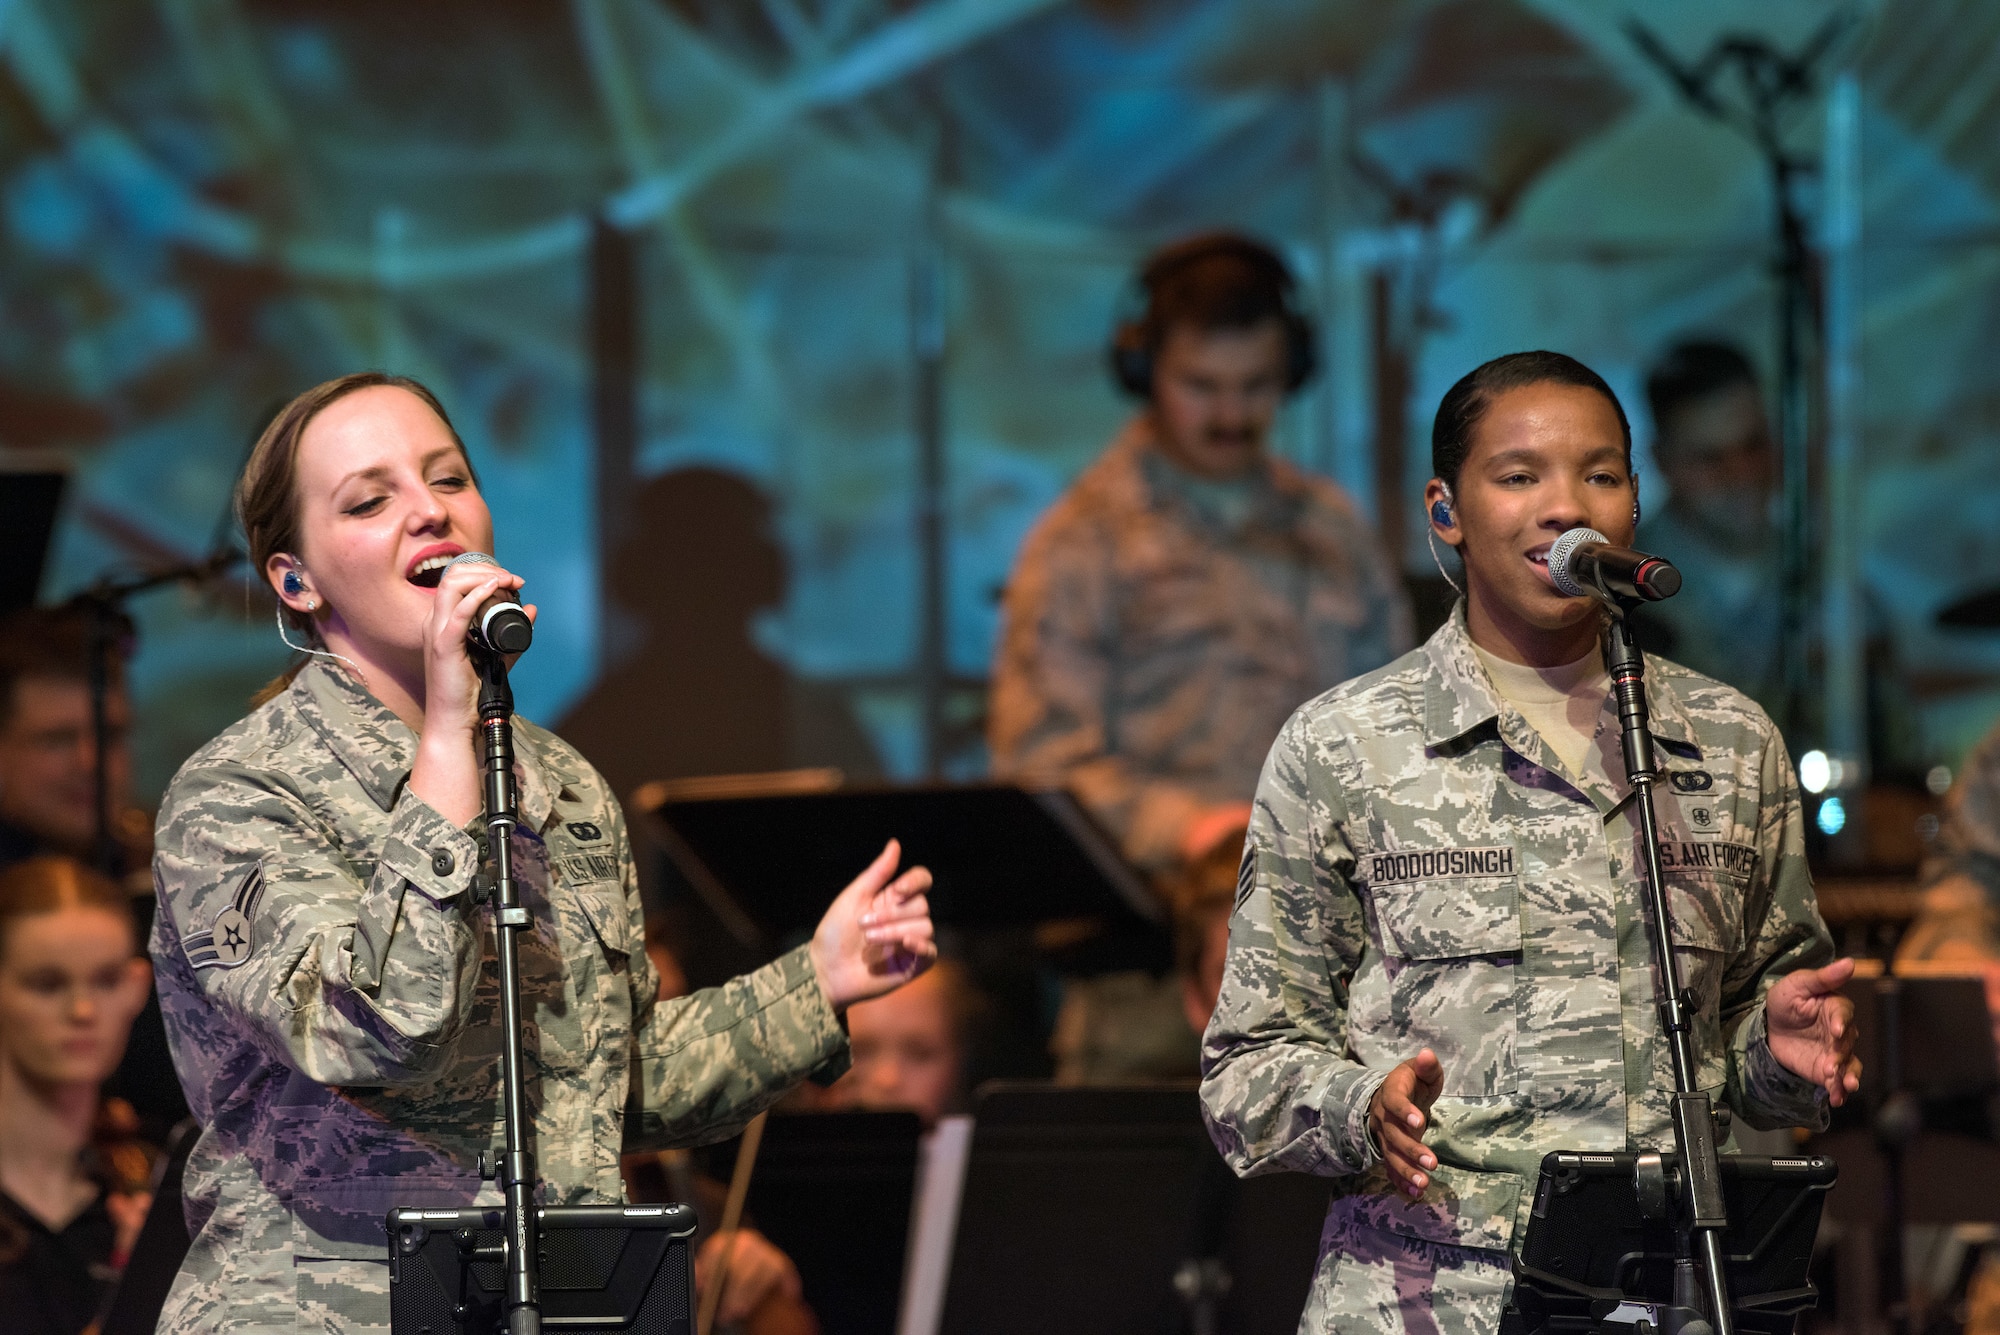 U.S. Air Force Airman 1st Class Kayla Highsmith, left, and Senior Airman Salina Boodoosingh, both vocalists with the rock music group “Mobility” of The United States Air Force Band of the Golden West, Travis Air Force Base, Calif., perform with musicians from the Napa Valley Youth Symphony at the Veteran’s Home in Yountville, Calif., March 4, 2018. The band and symphony are performing together after the original concert, scheduled in October 2017, was canceled due to devastating wildfires in Napa and Sonoma counties. (U.S. Air Force photo by Louis Briscese)